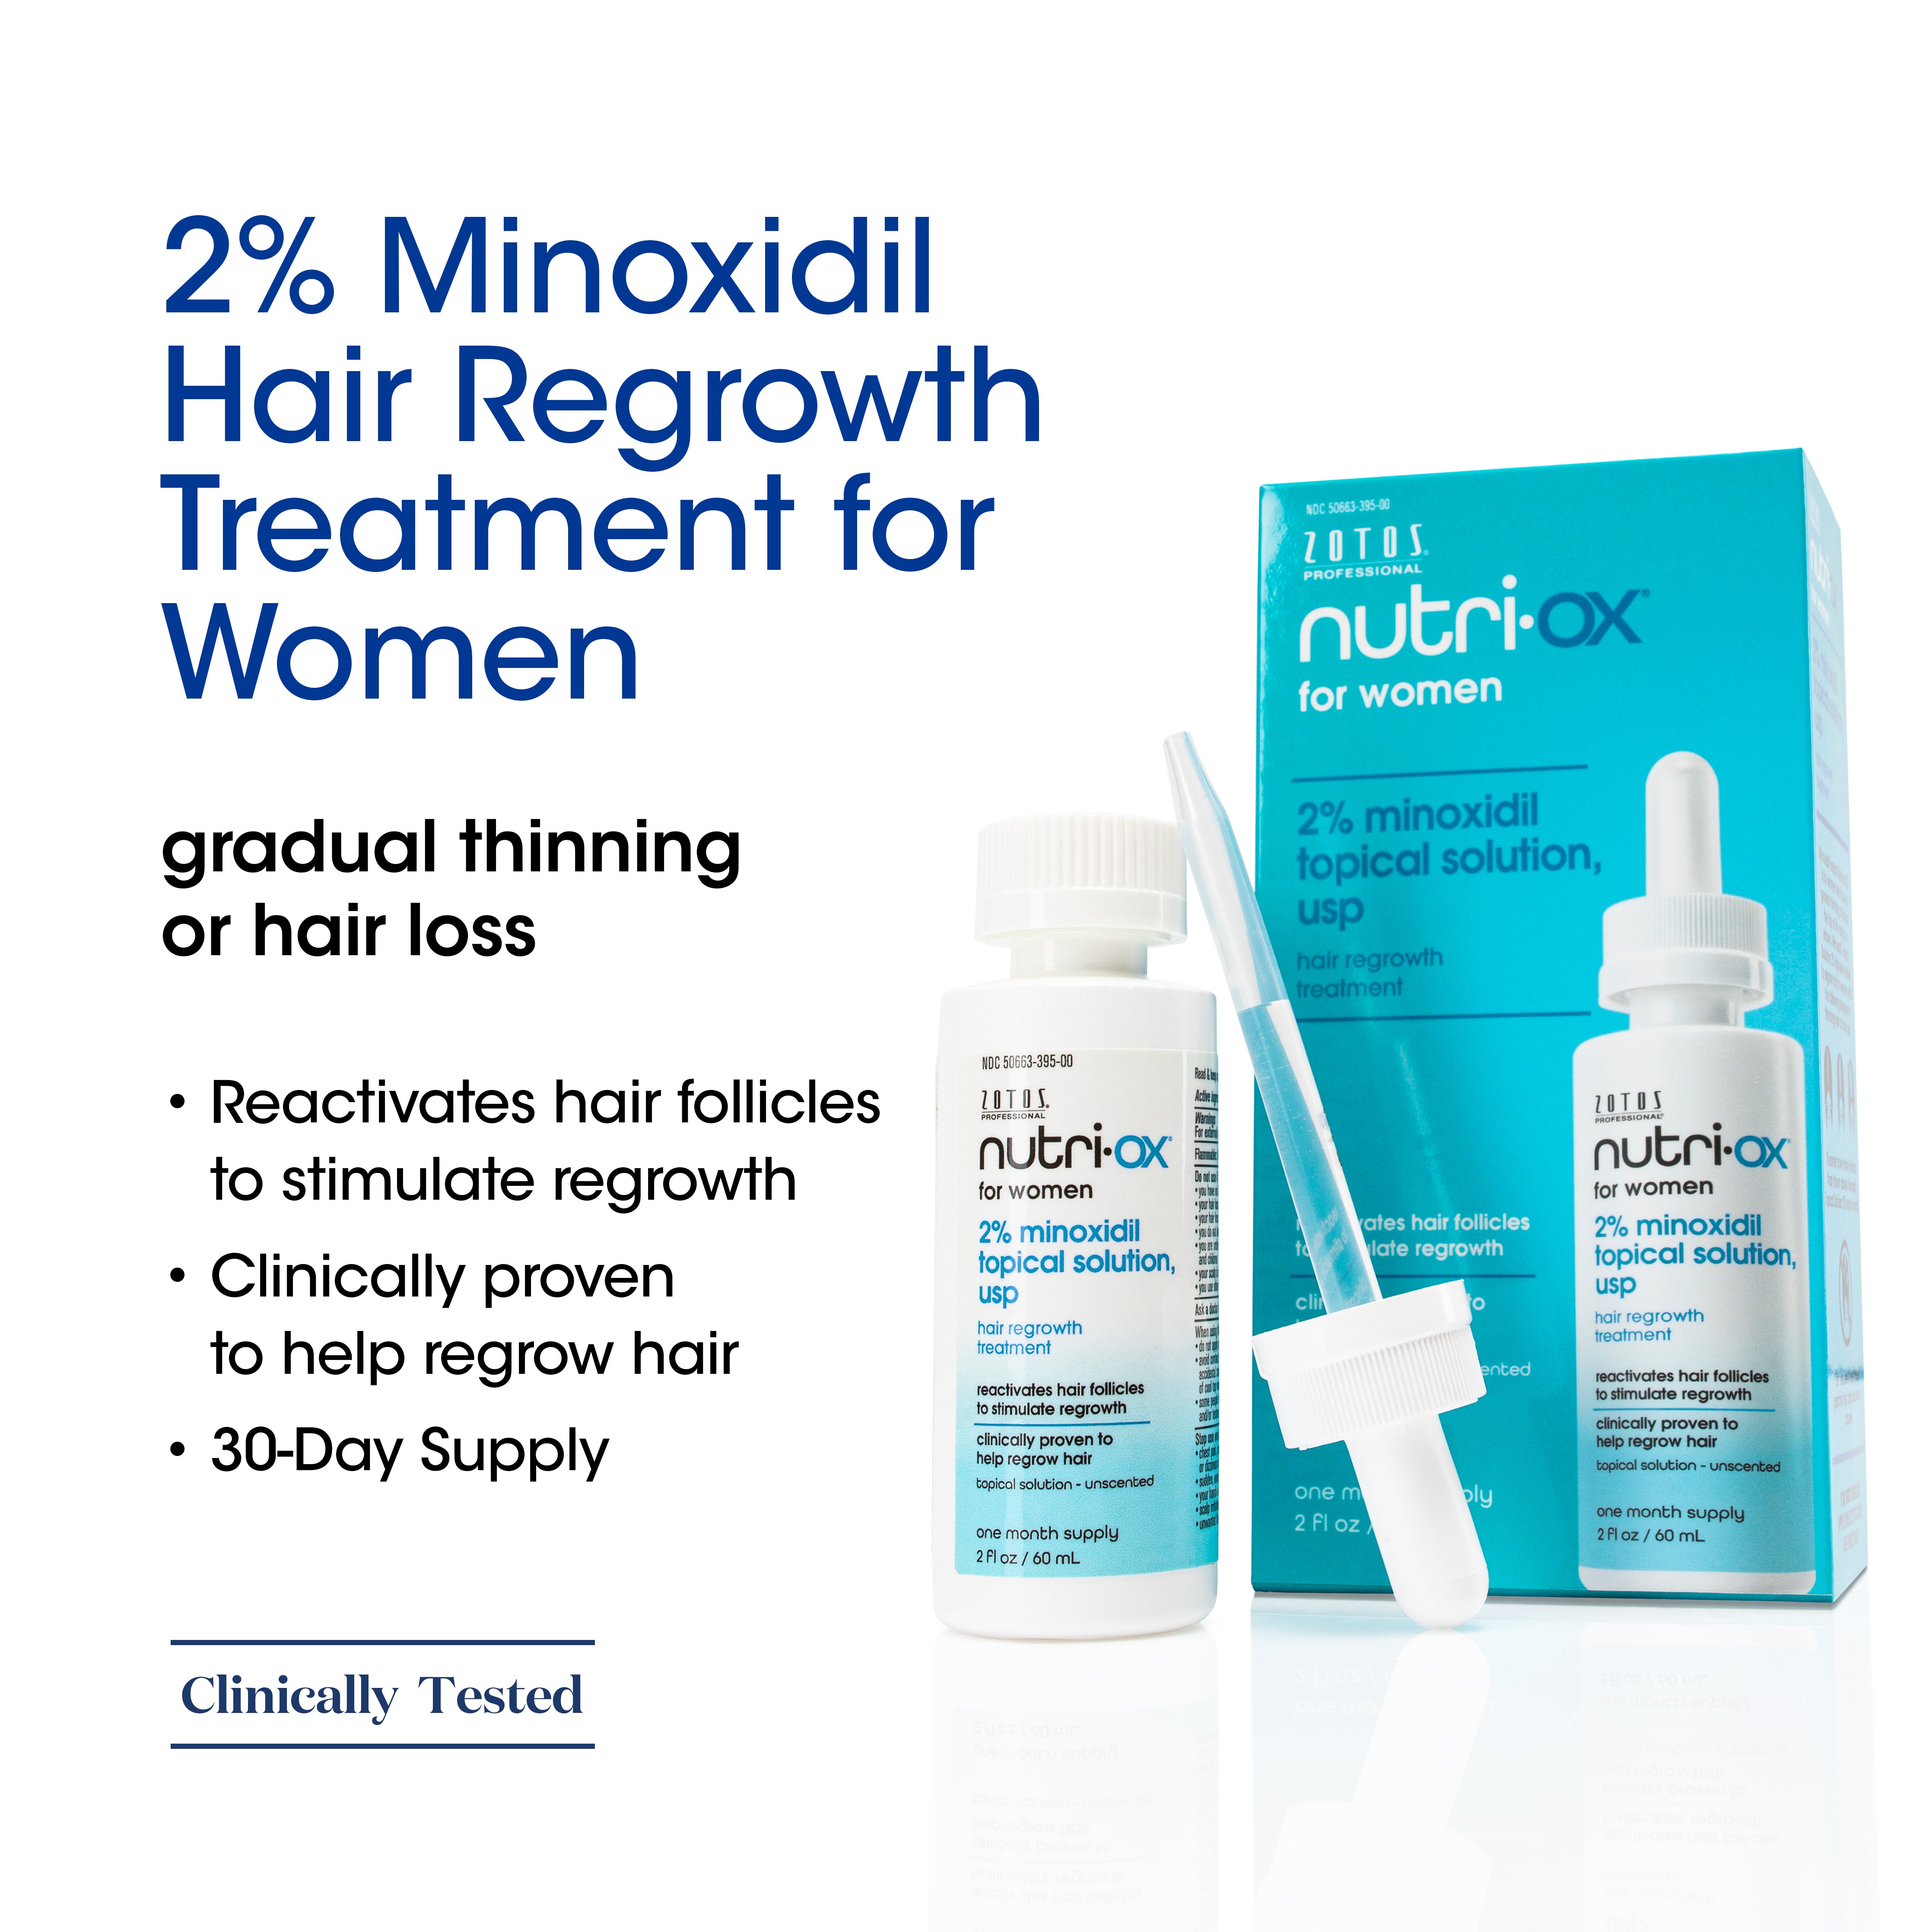 2% Minoxidil Hair Regrowth Treatment for Women. For gradual thinning or hair loss. Reactivated hair follicles to stimulate regrowth. Clinically proven to help regrow hair. 30-Day supply.